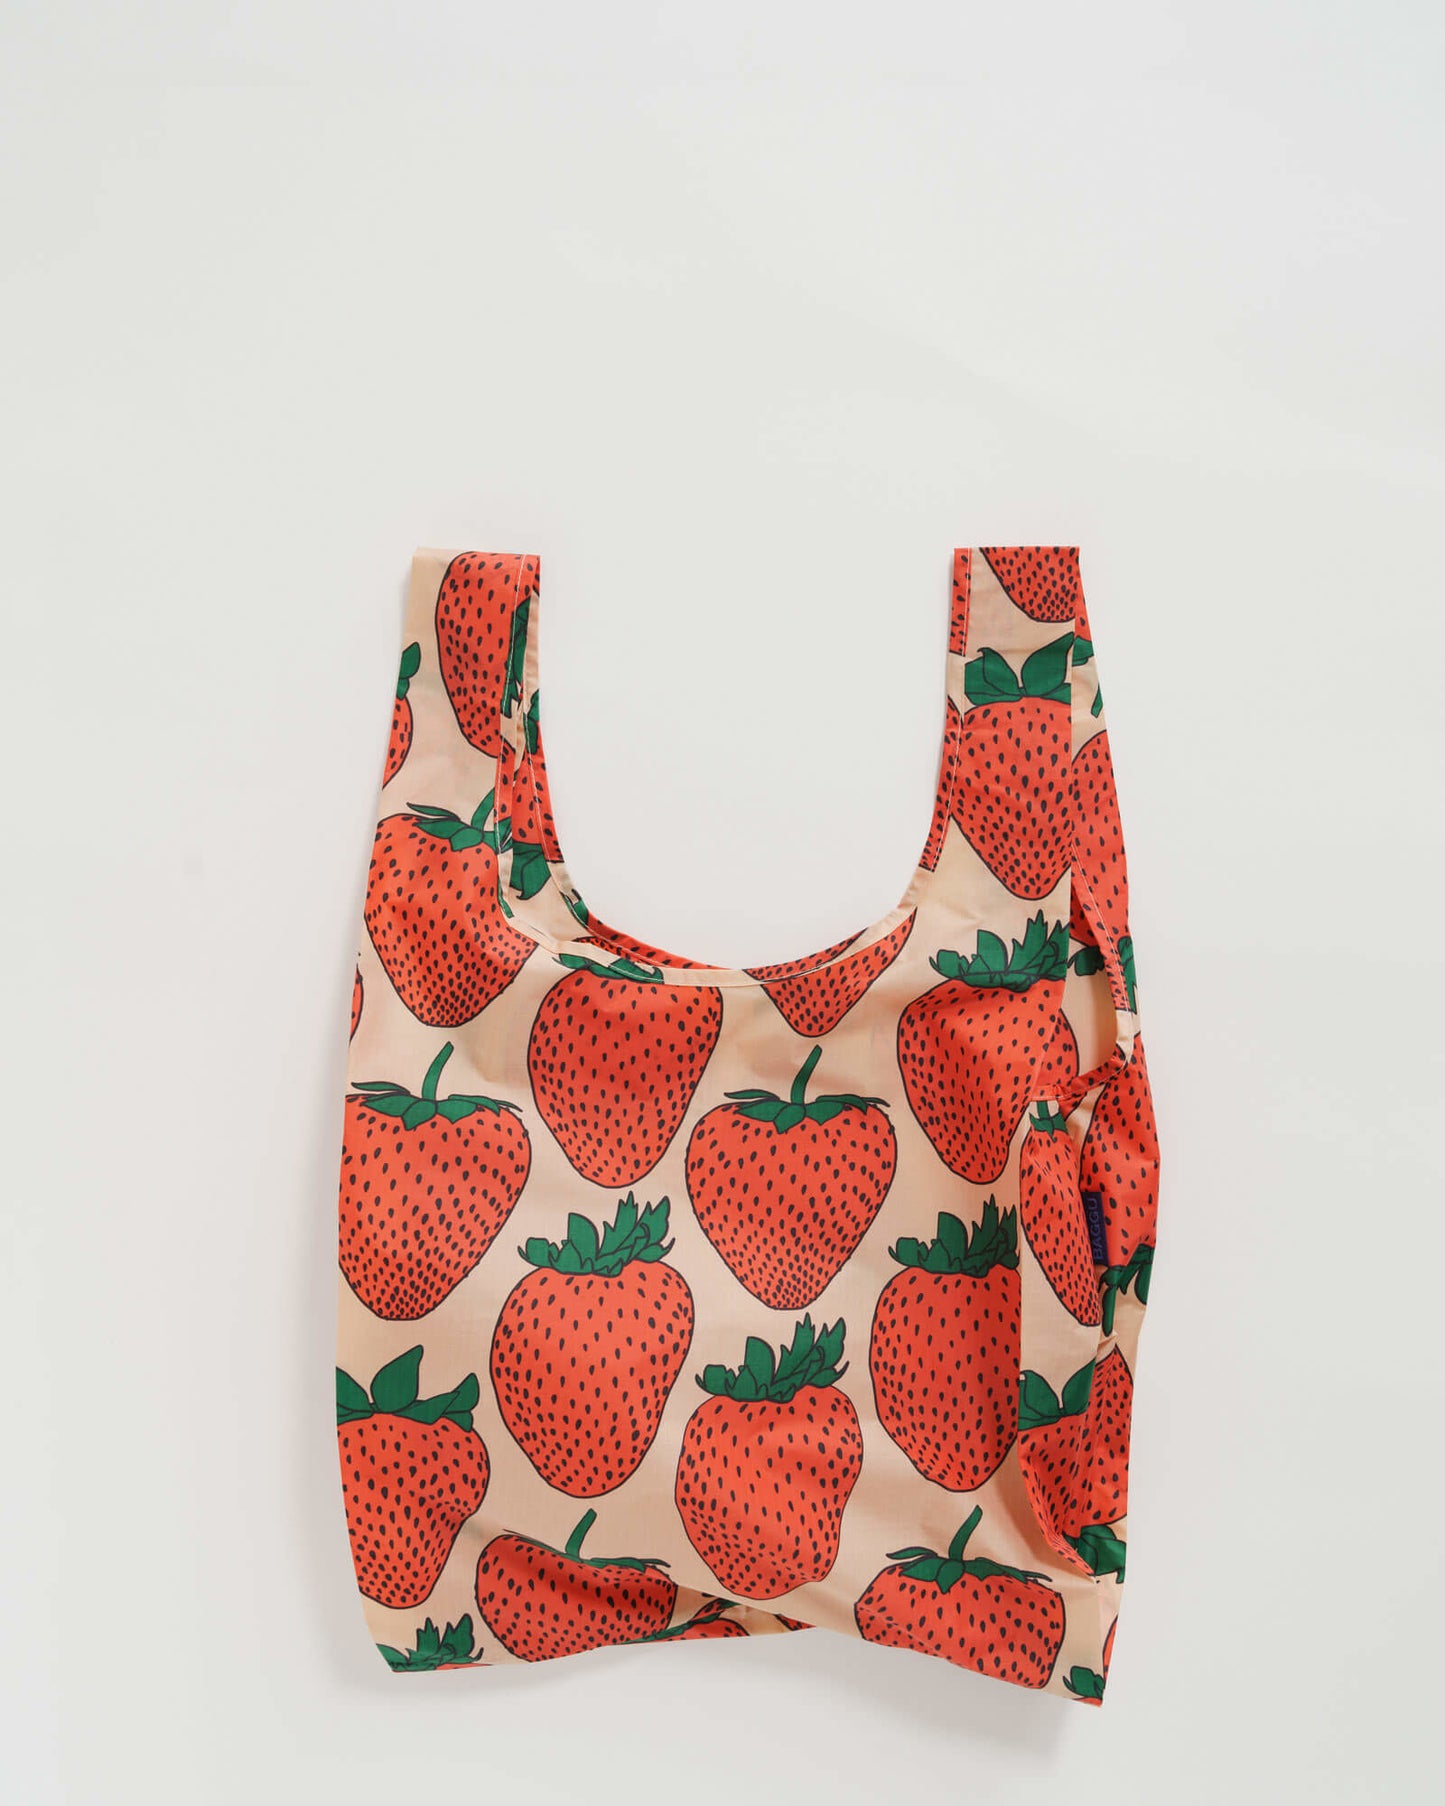 Reusable shopping bag with strawberry pattern